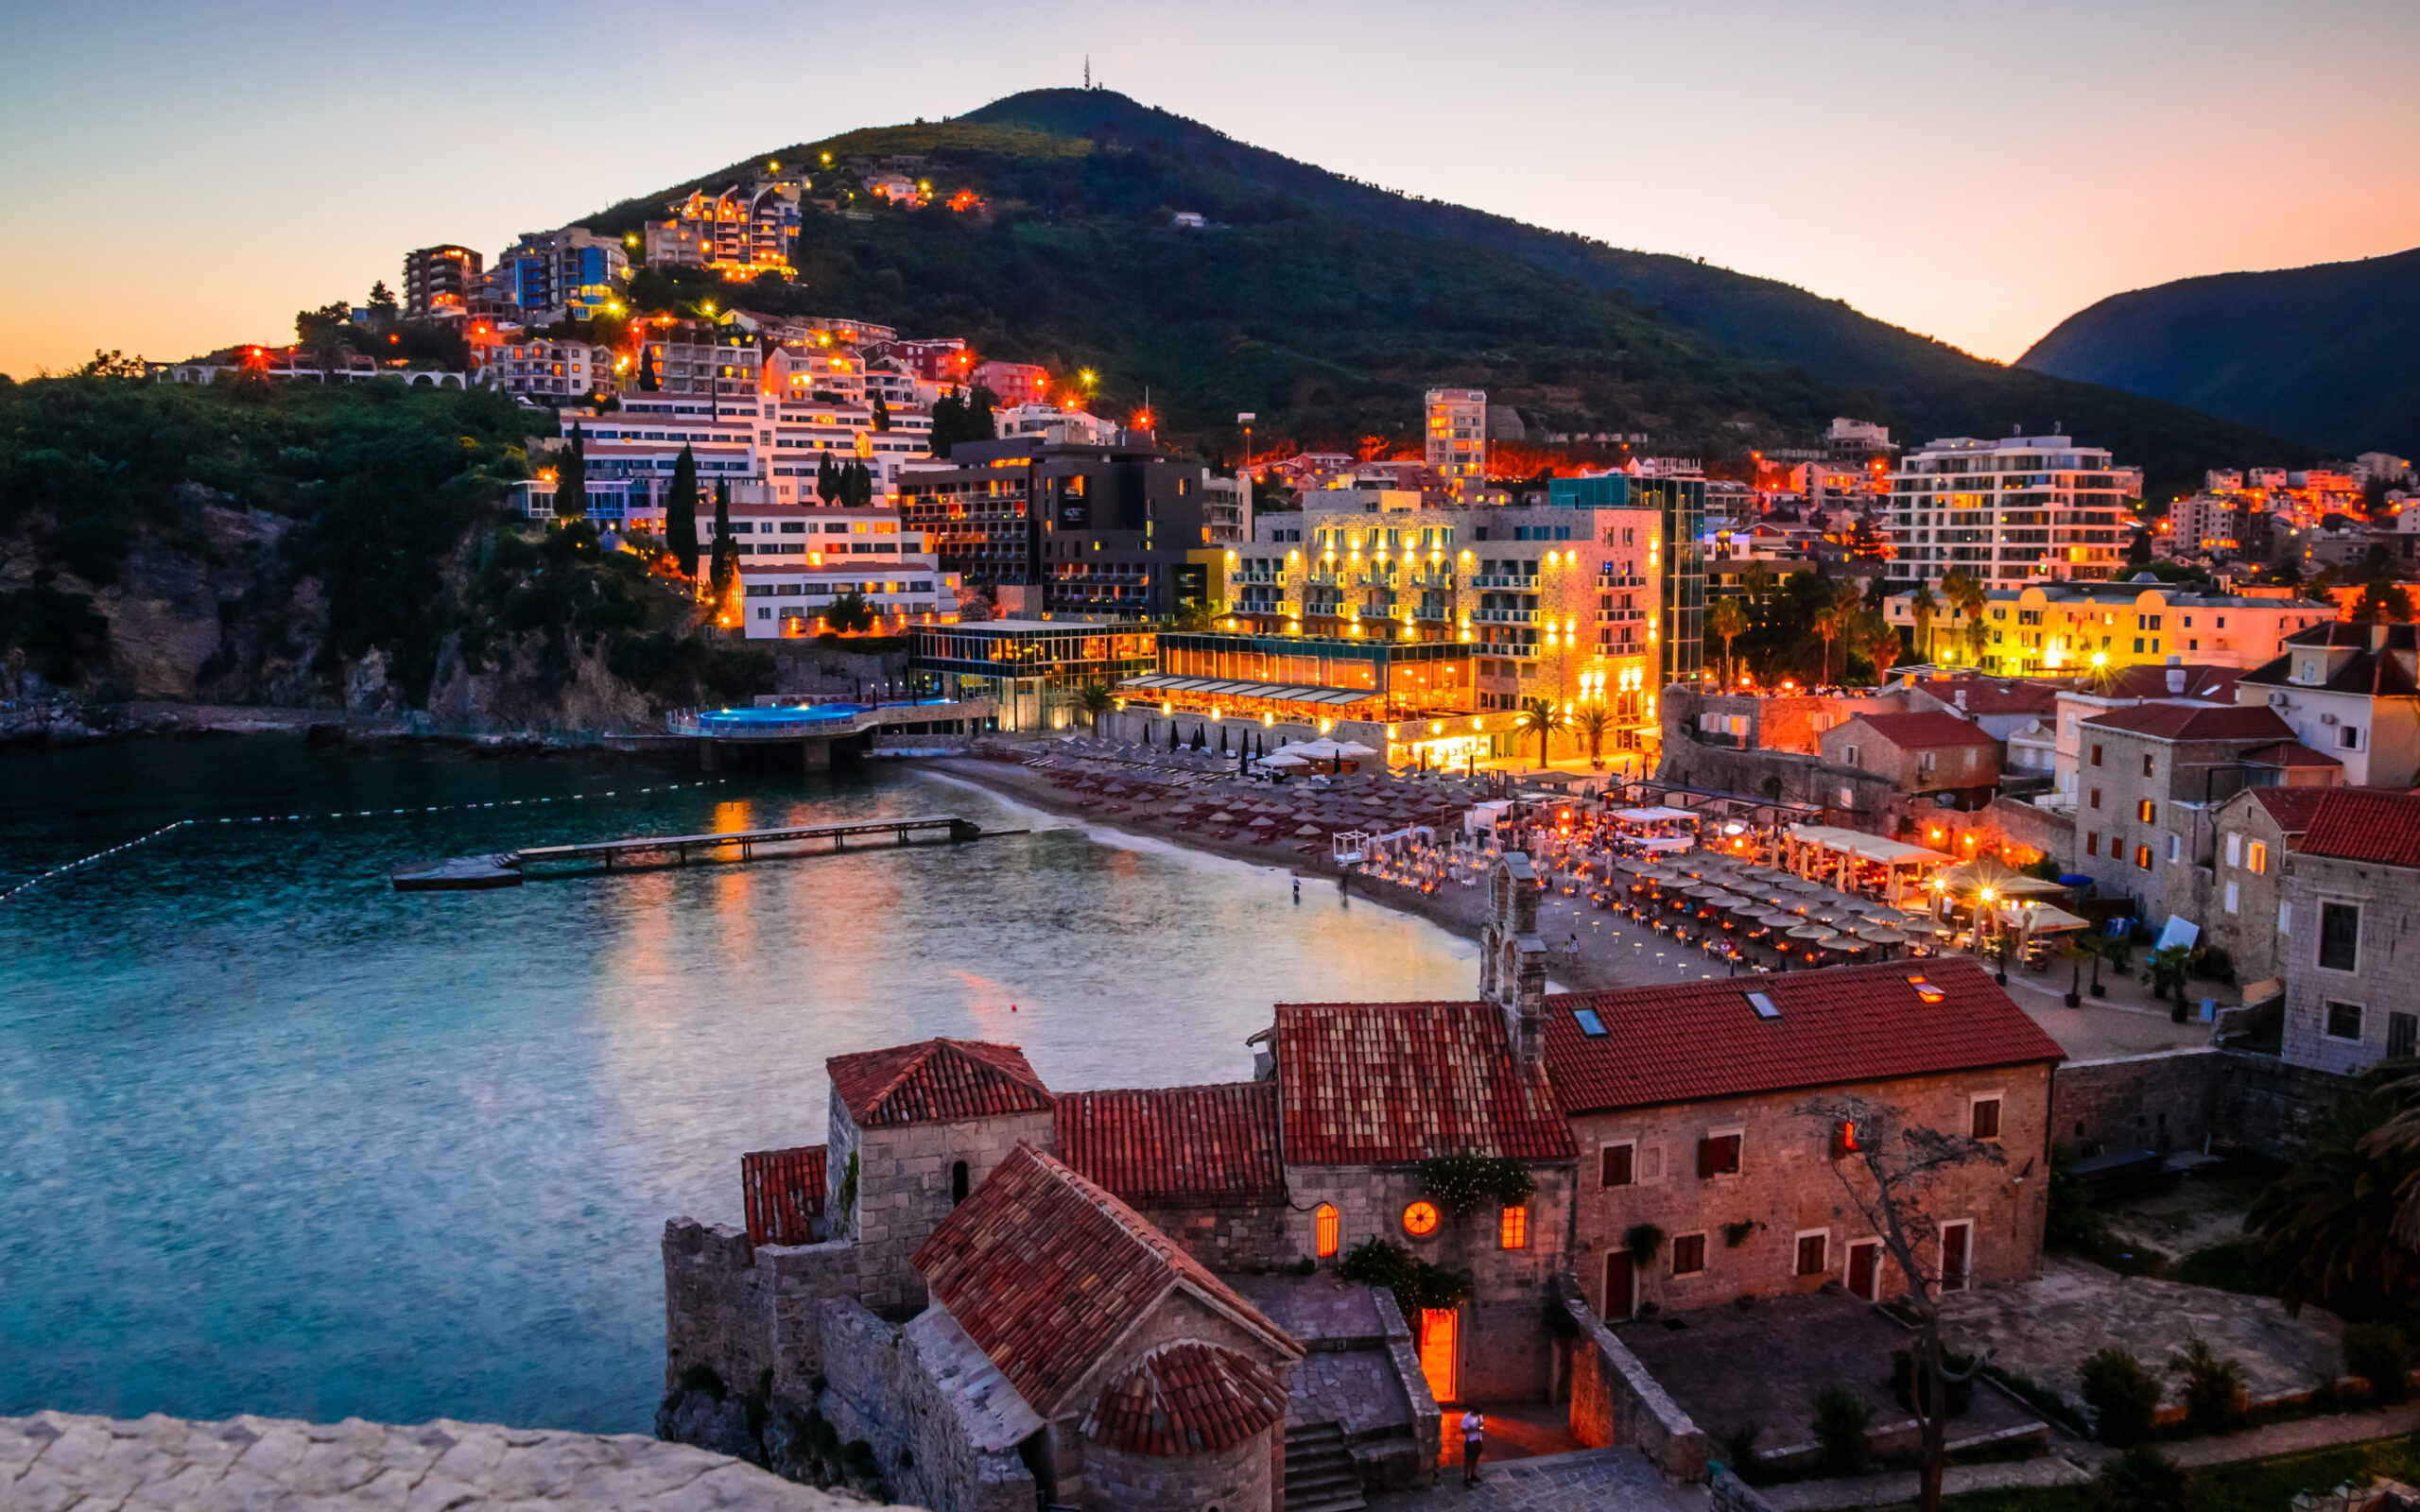 production-services-and-filming-in-montenegro-illuminated-coastline-and-old-town